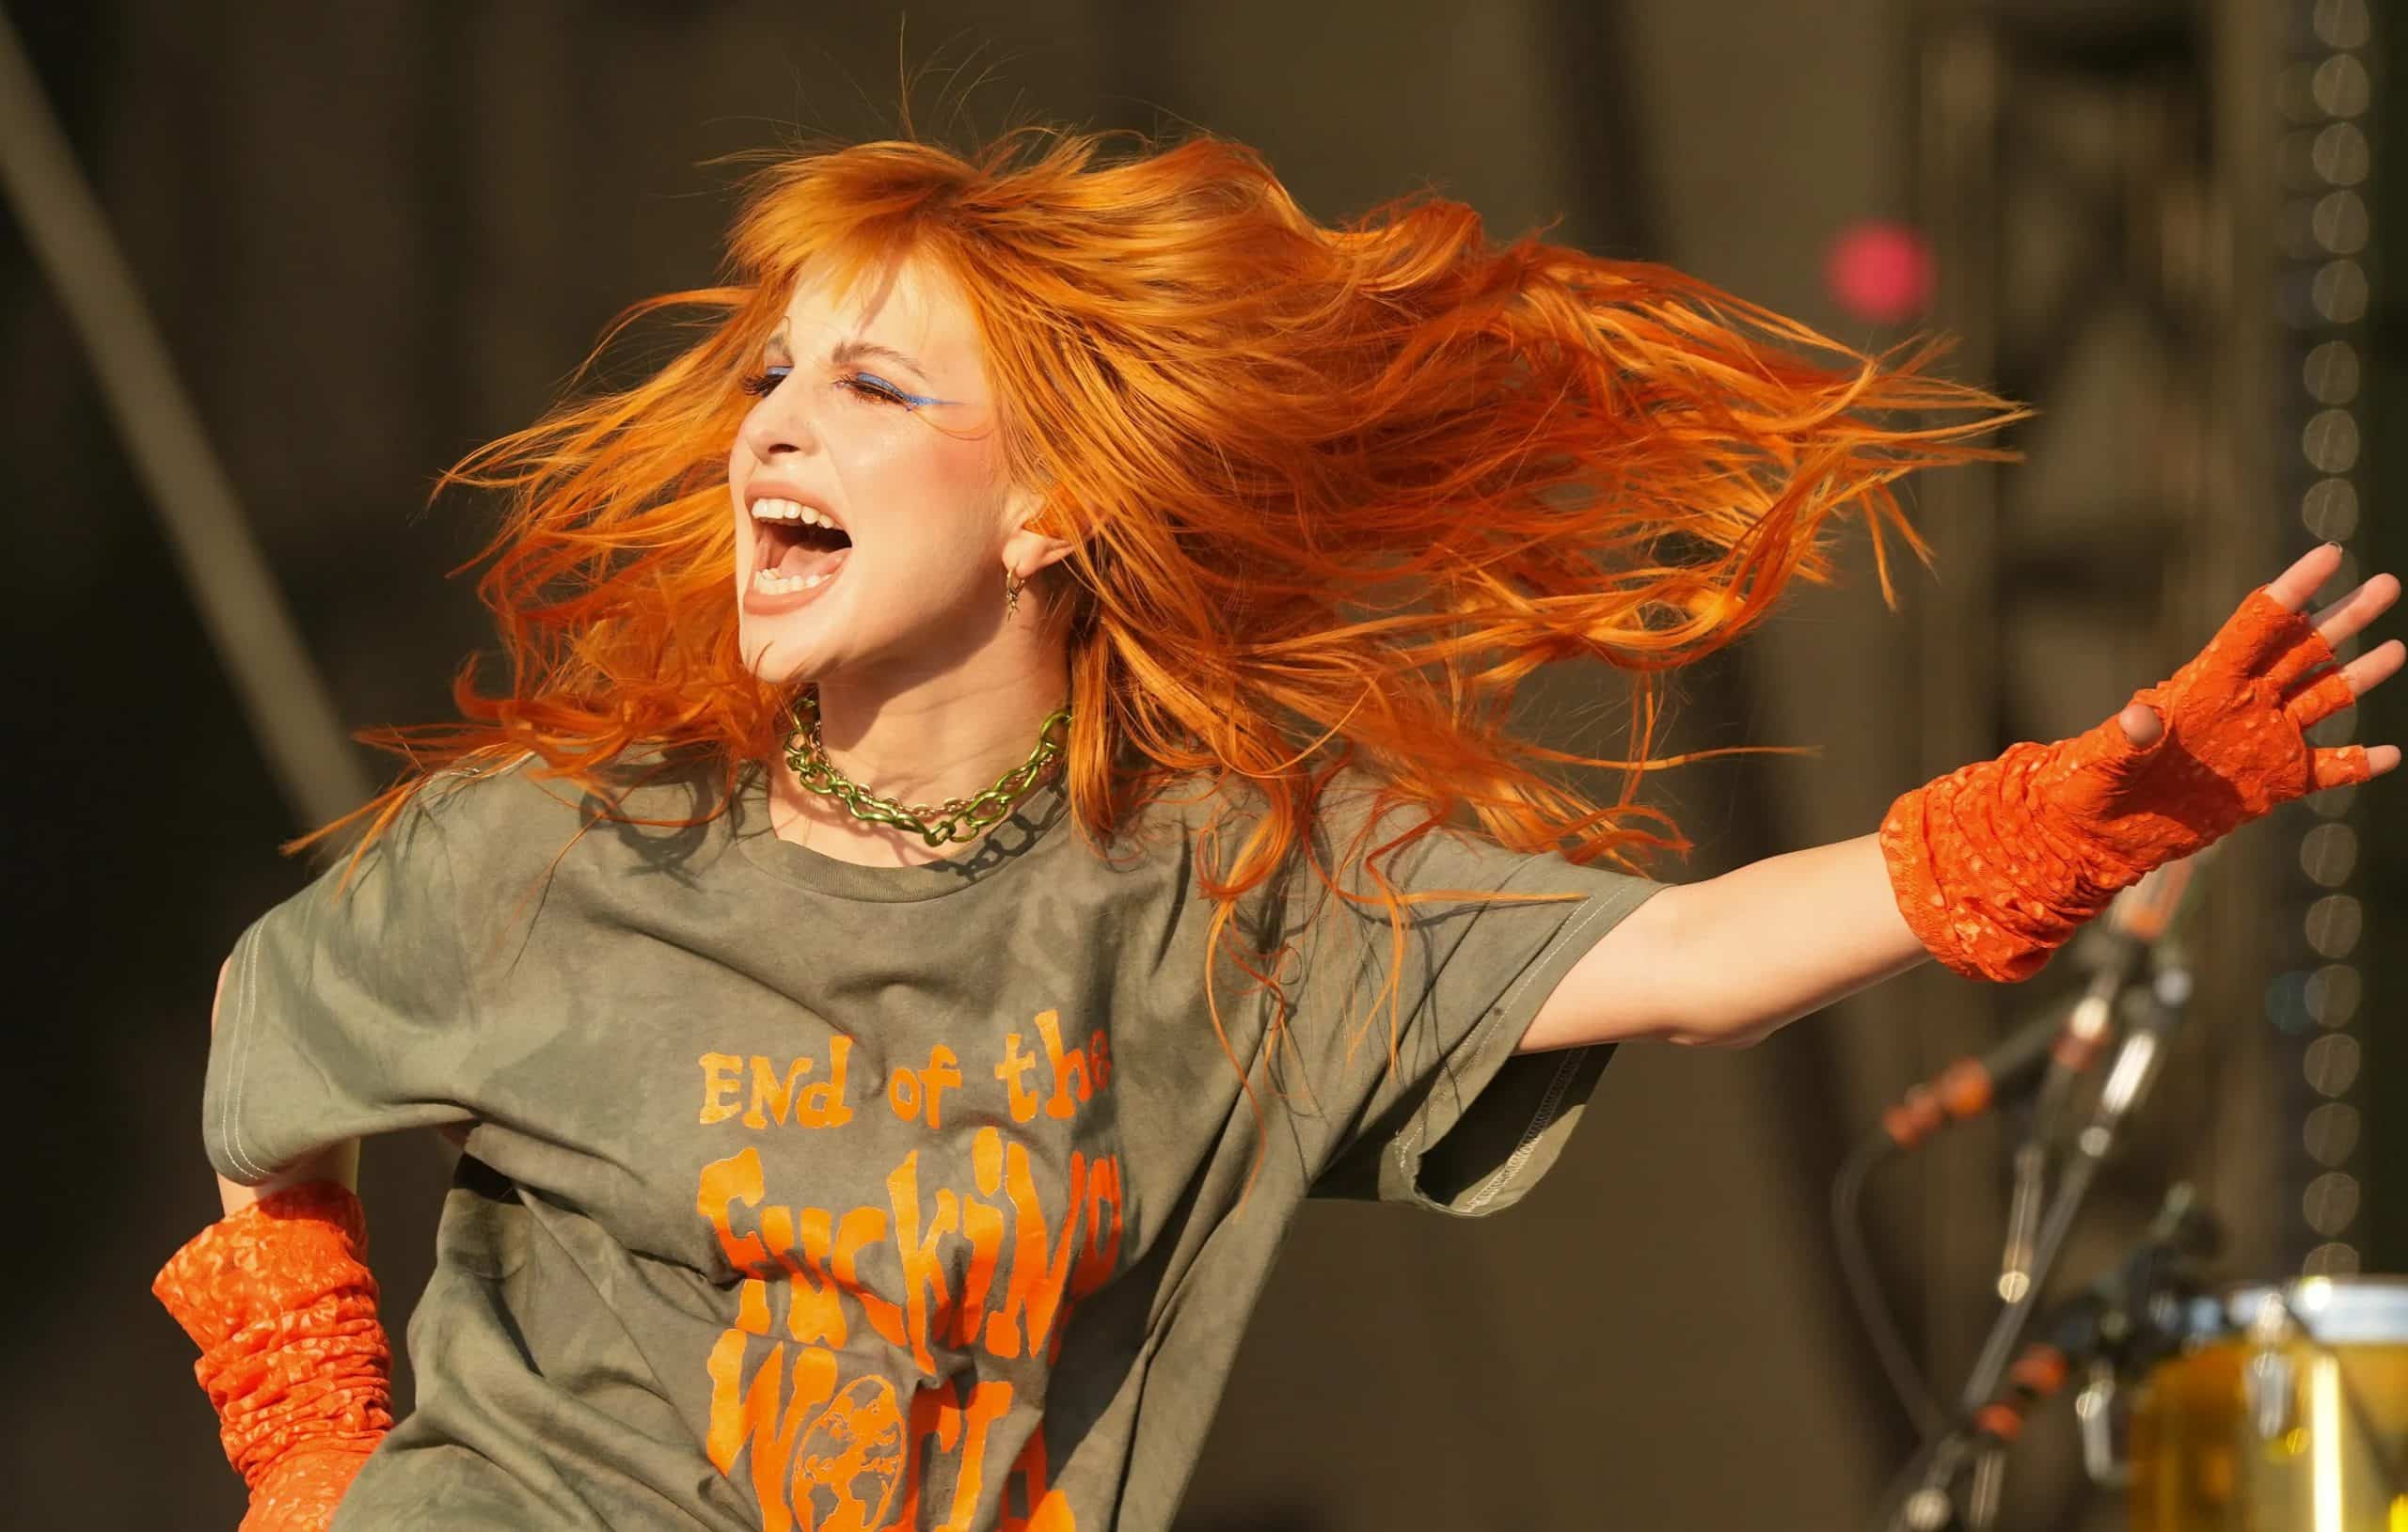 Paramore's Best Songs, Ranked